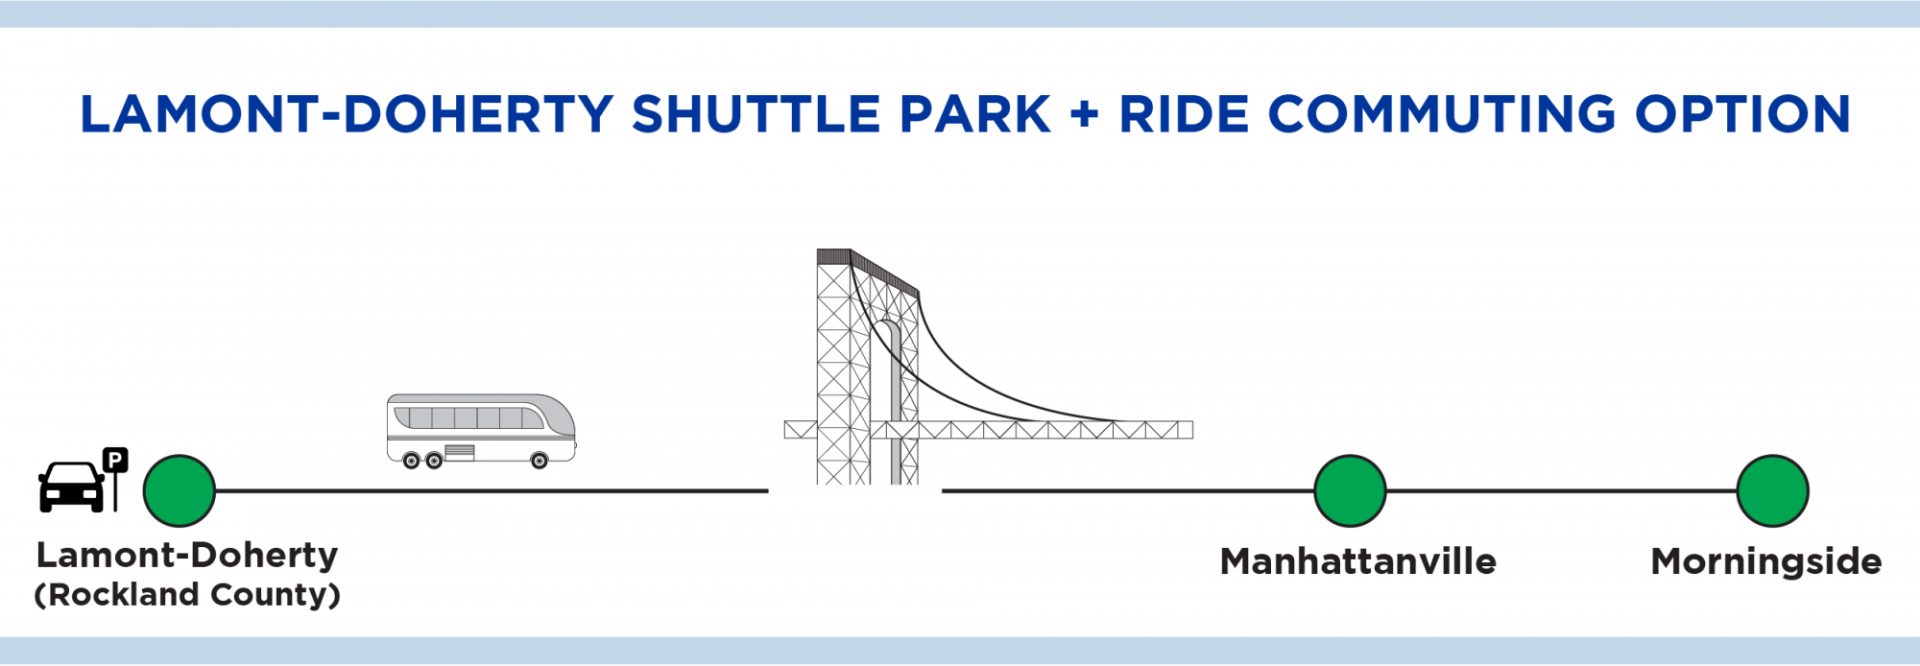 "Lamont-Doherty Shuttle Park + Ride Commuting Option" text above a graphic showing a car parked at LDEO, a bus driving over the George Washington Bridge, and two stops for Manhattanville and Morningside campus.